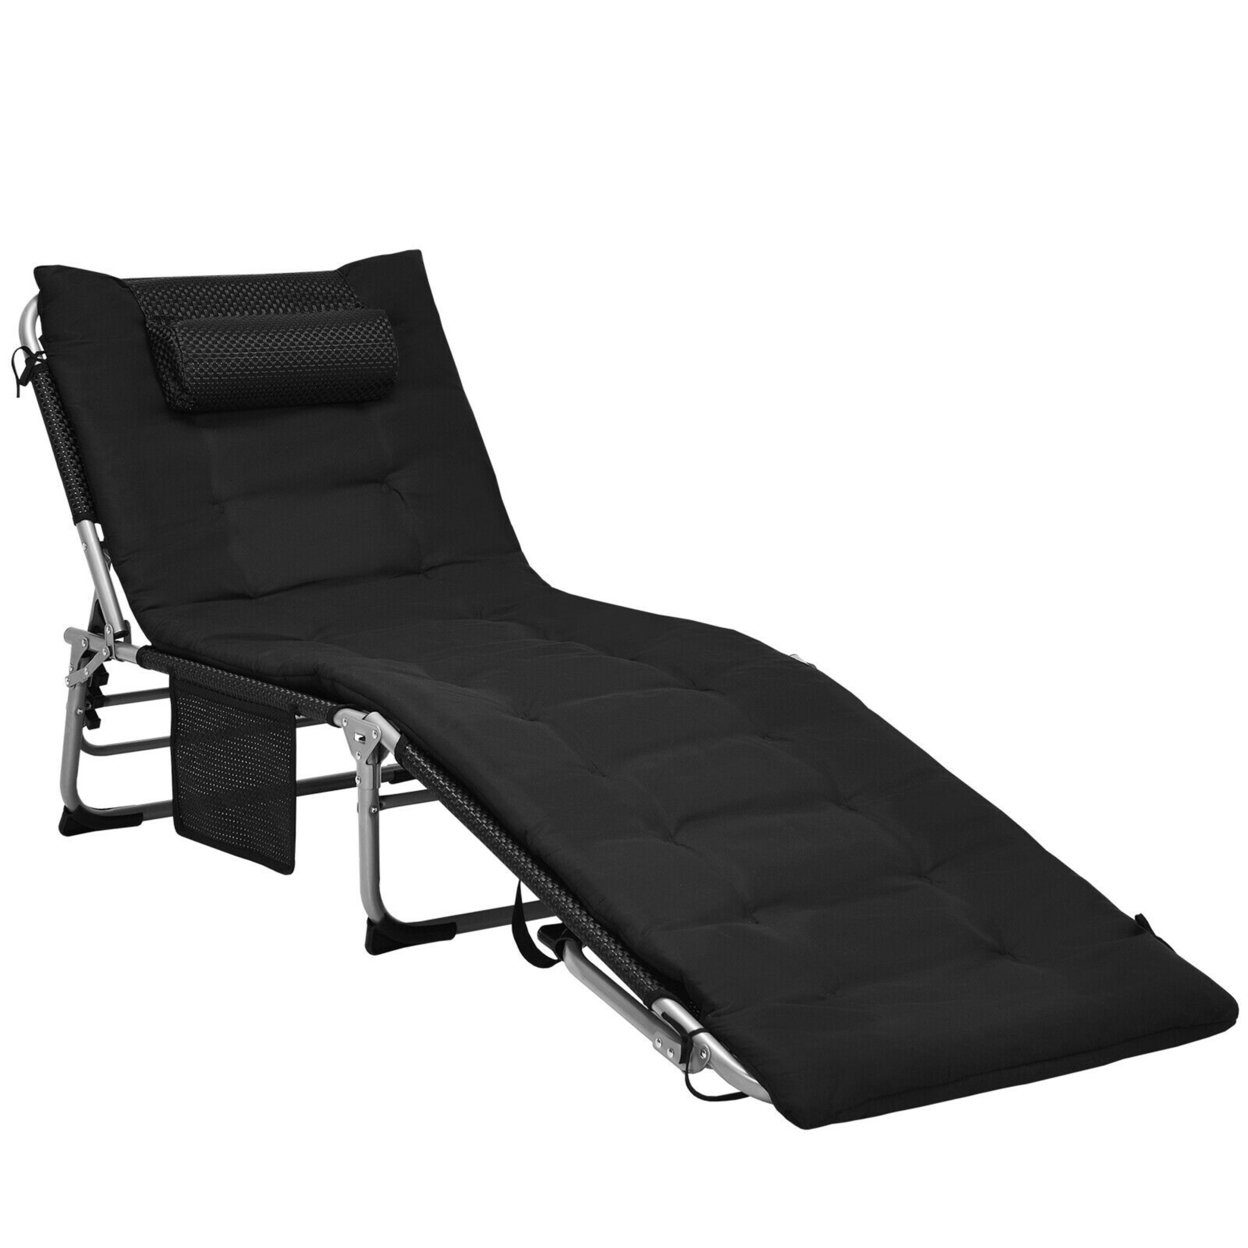 4-Fold Oversize Padded Folding Chaise Lounge Chair Reclining Chair - Black